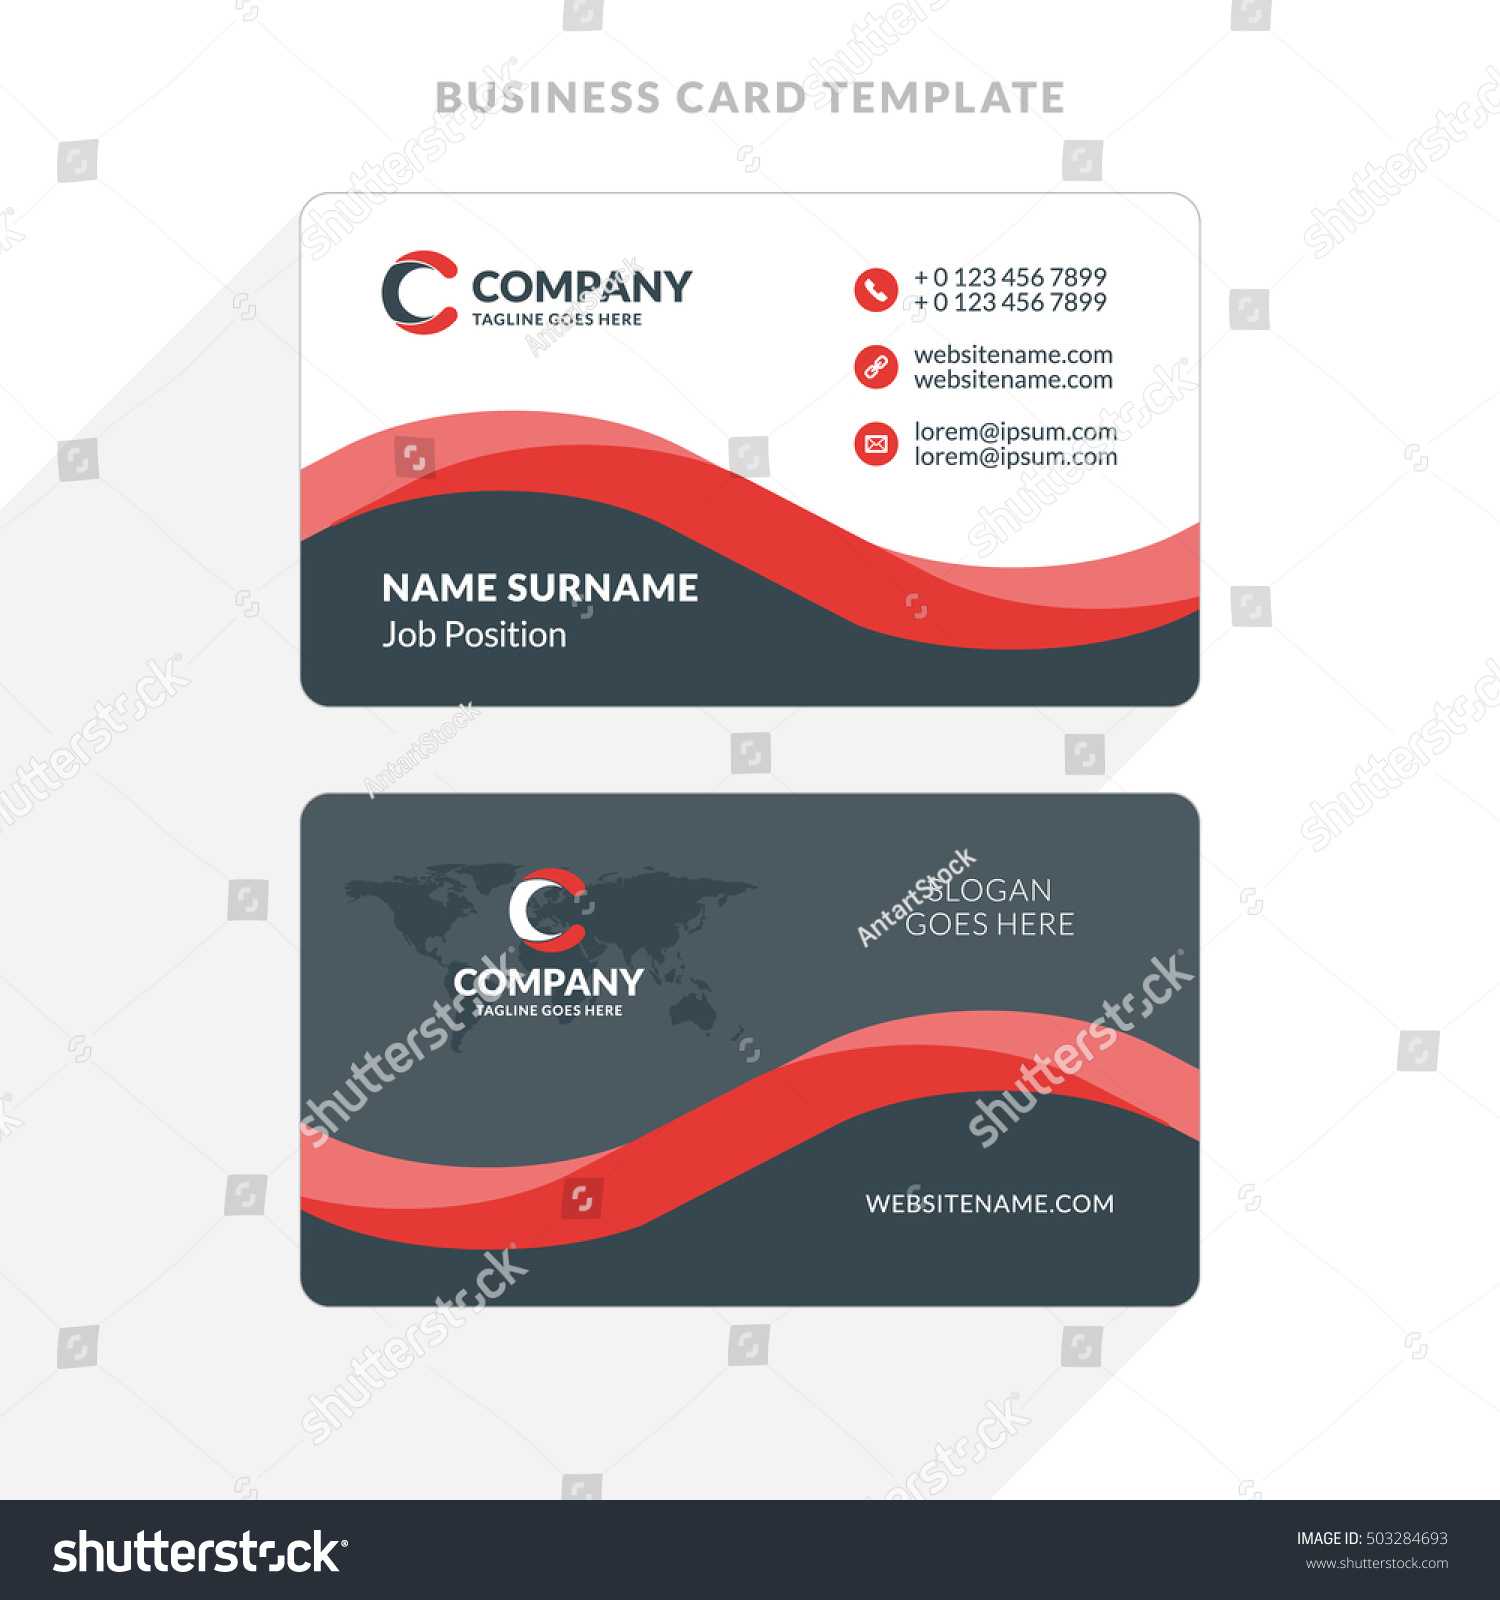 Double Sided Business Card Template Illustrator ] – Adobe Inside Double Sided Business Card Template Illustrator